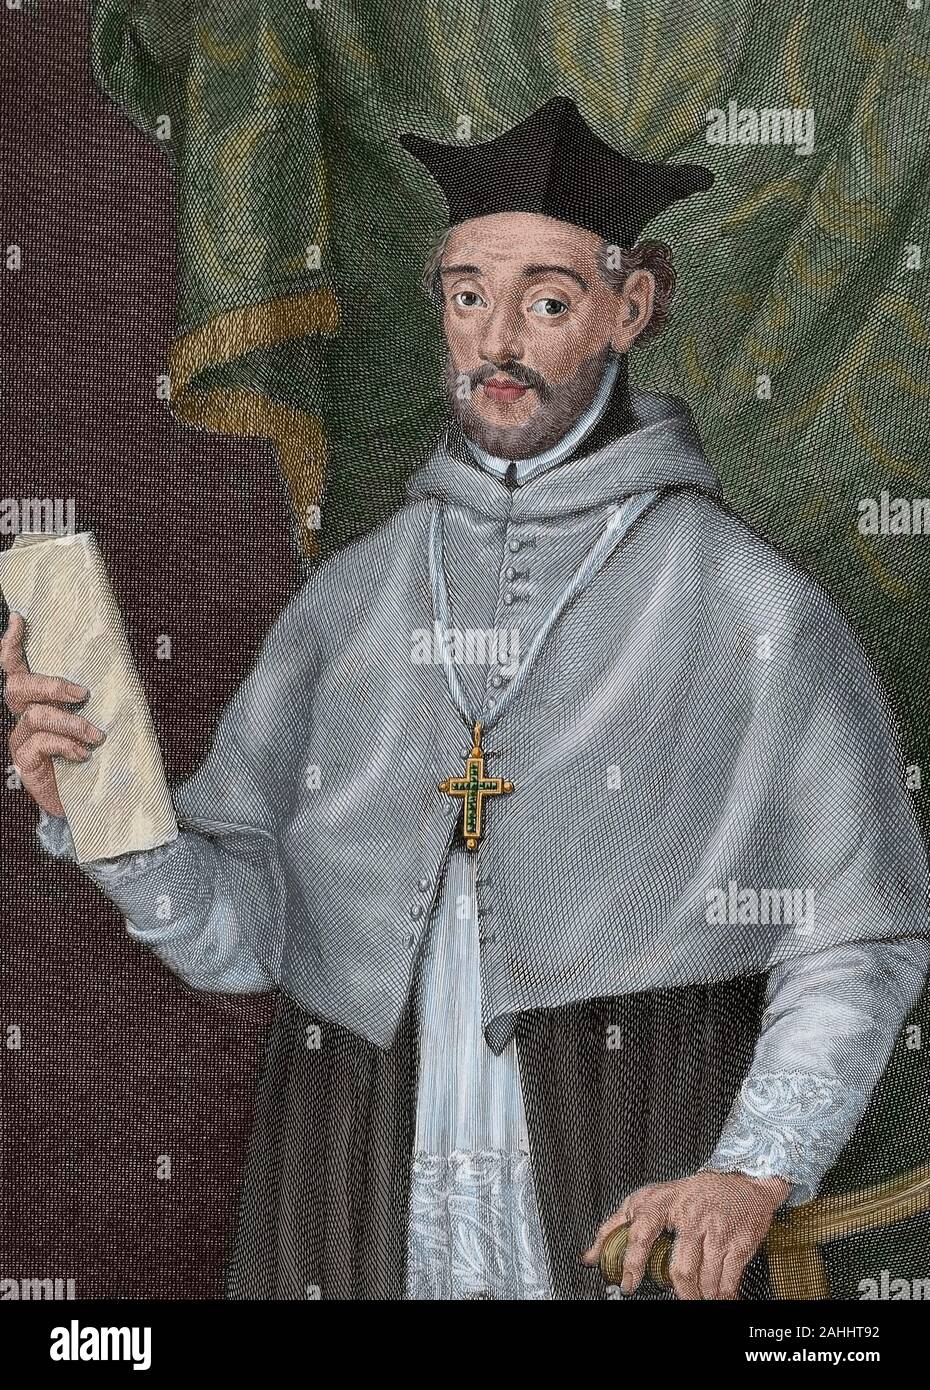 Diego de Covarrubias y Leiva (Toledo, 1512-Madrid, 1577). Spanish bishop, jurisconsult and monetarist. He was president of the Council of Castile and bishop of Segovia. He stood out his intervention at the Council of Trent, where he was commissioned to write the decrees 'de reformatione'. Engraving from 'Retratos de los españoles ilustres'. Drawing by Jose Maea (1760-1826). Engraving started by Luis Fernandez Noseret and finished by Manuel Salvador Carmona (1734-1820), 1794. Later colouration. Stock Photo